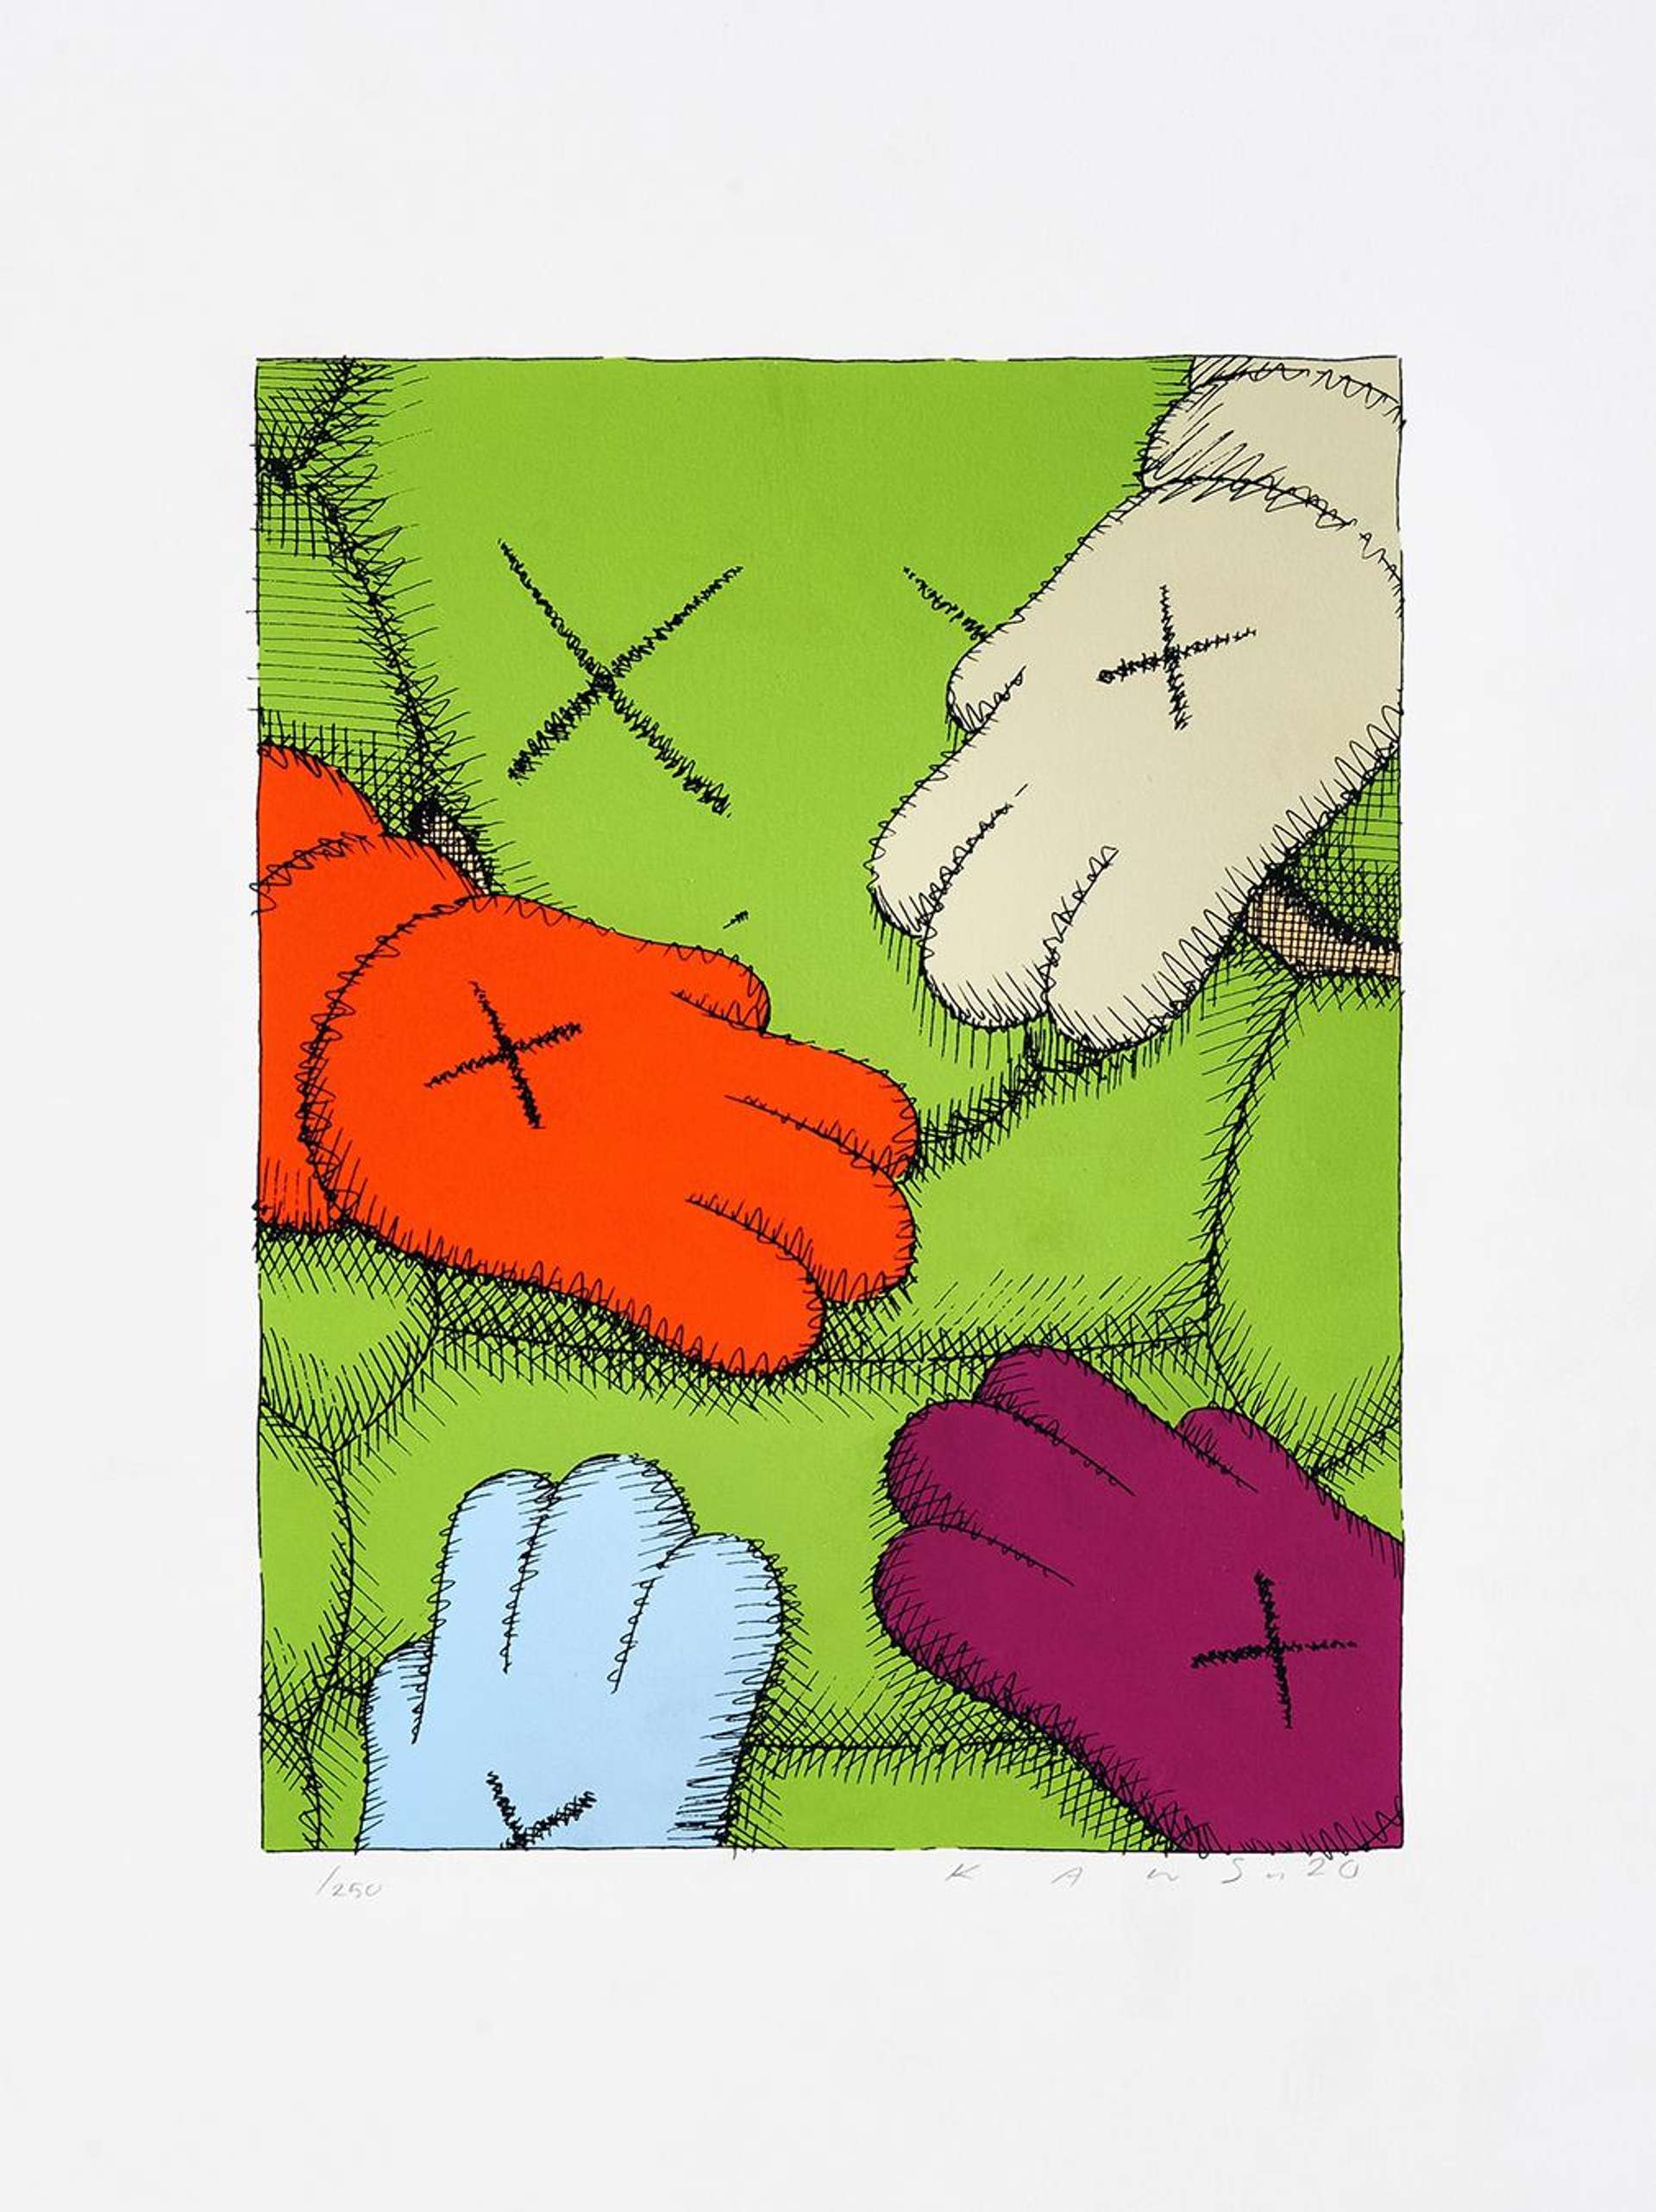 KAWS’ Urge 9. A screenprint of multiple animated hands covering a green animated figure. 